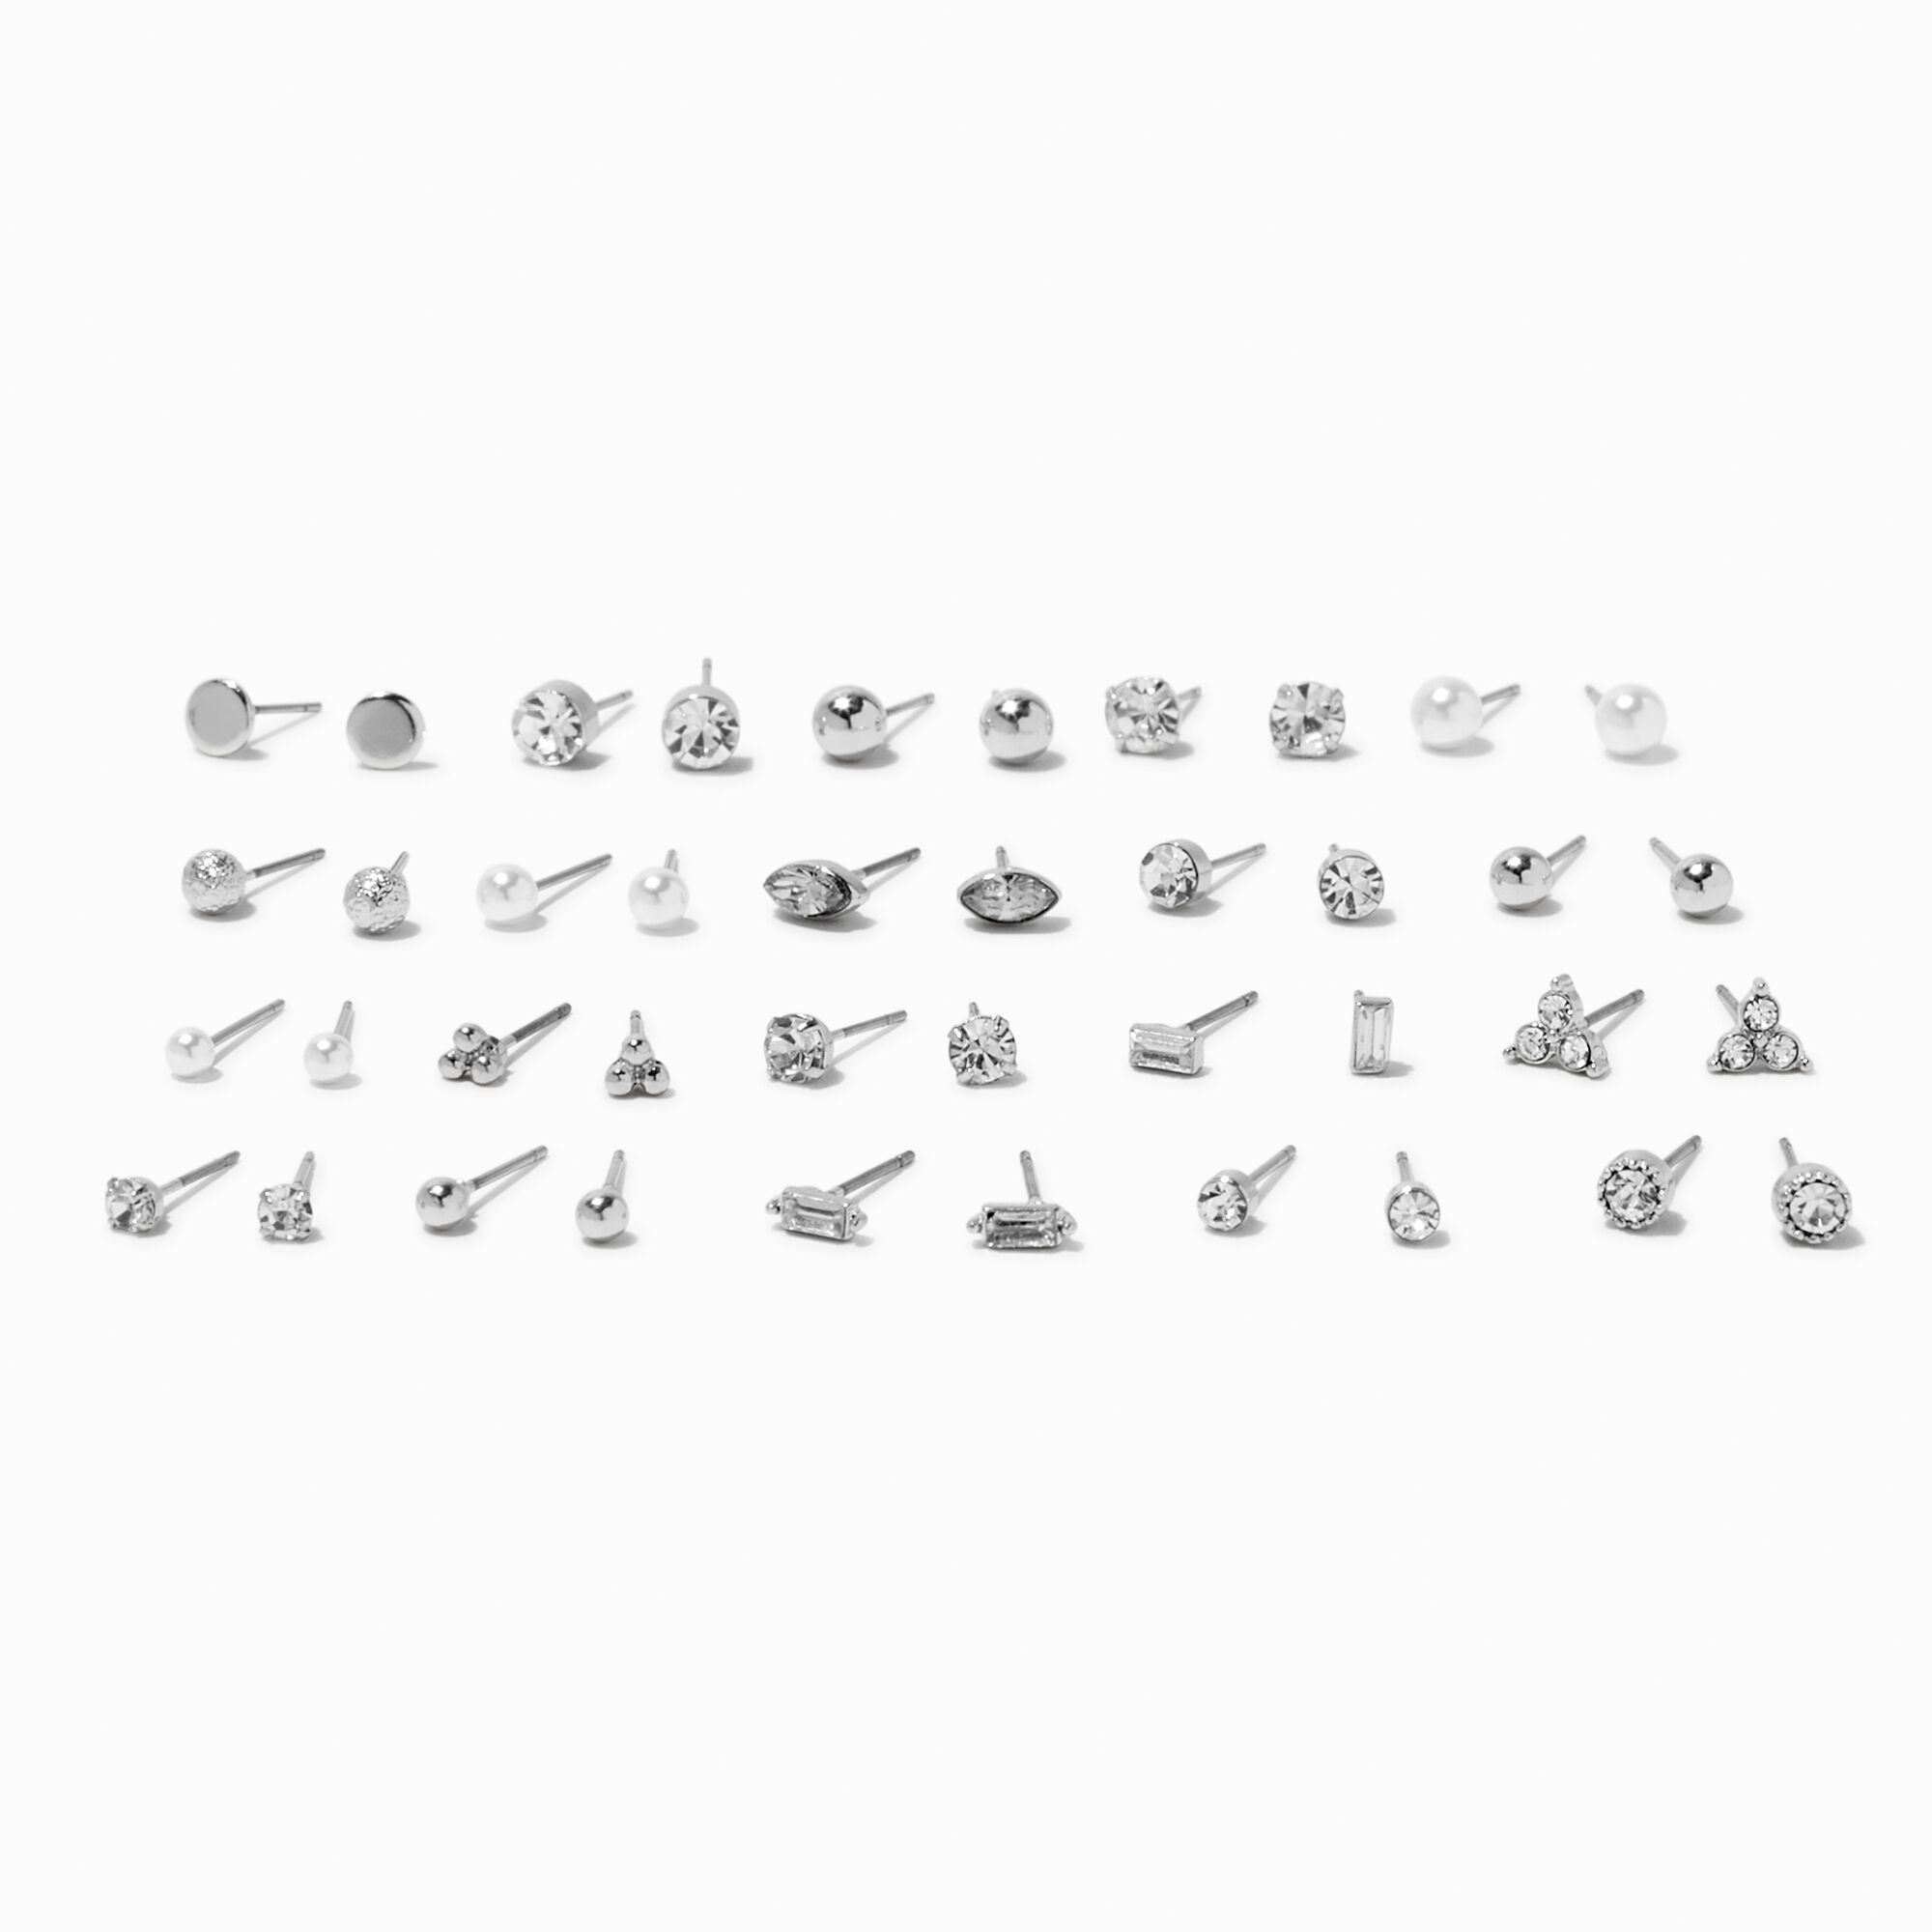 View Claires Tone Micro Crystal Stud Earrings 20 Pack Silver information